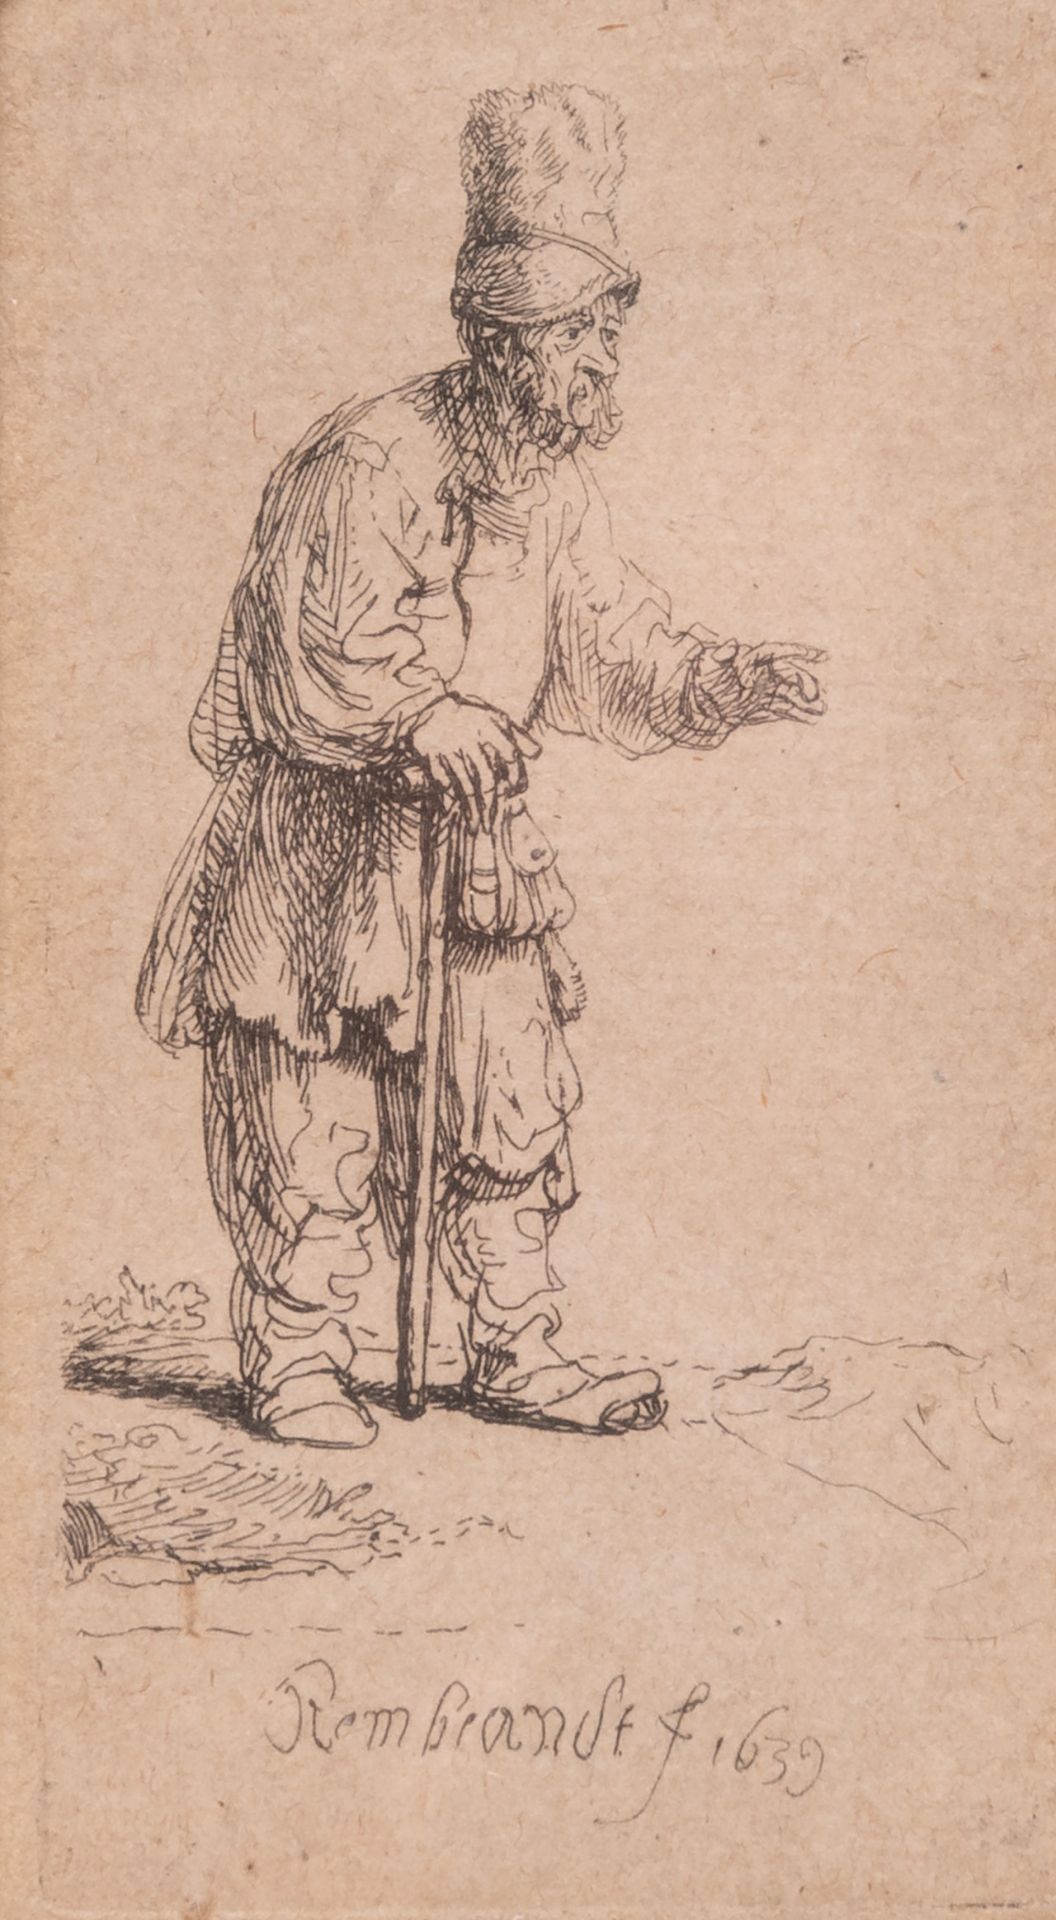 Rembrandt (1606/07-1669), etching 'A Peasant in a High Cap, Standing Leaning on a Stick' (1639), fra